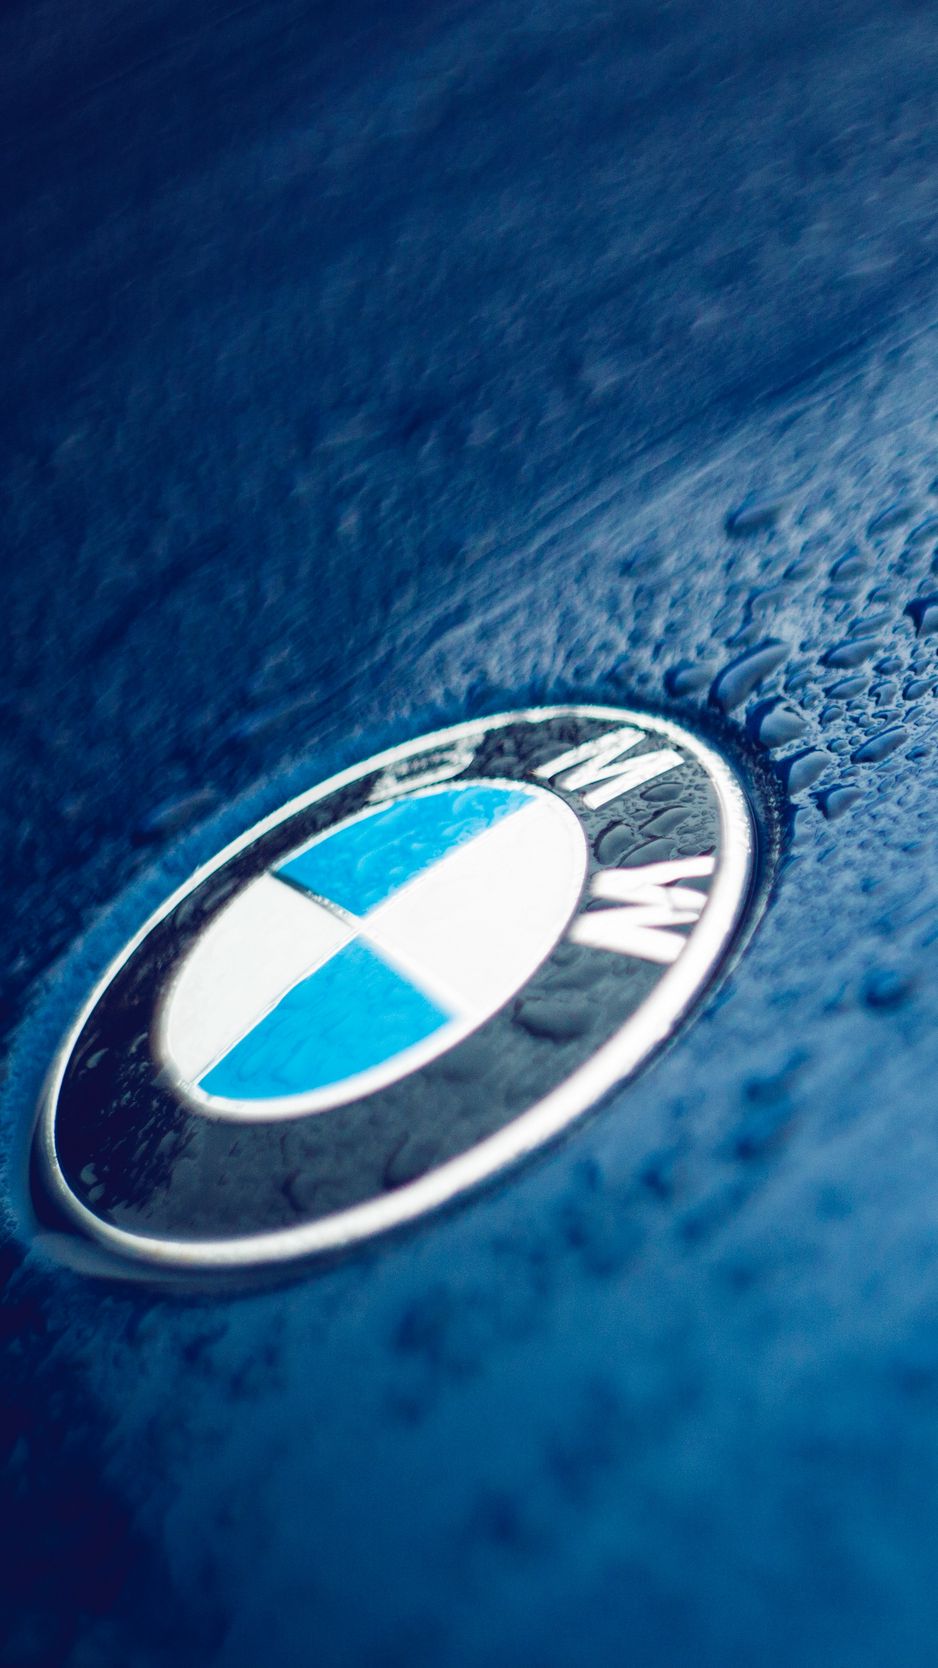 Bmw Logo Iphone Wallpapers Hd Iphone Wallpaper And Cases Hd  Fans Share